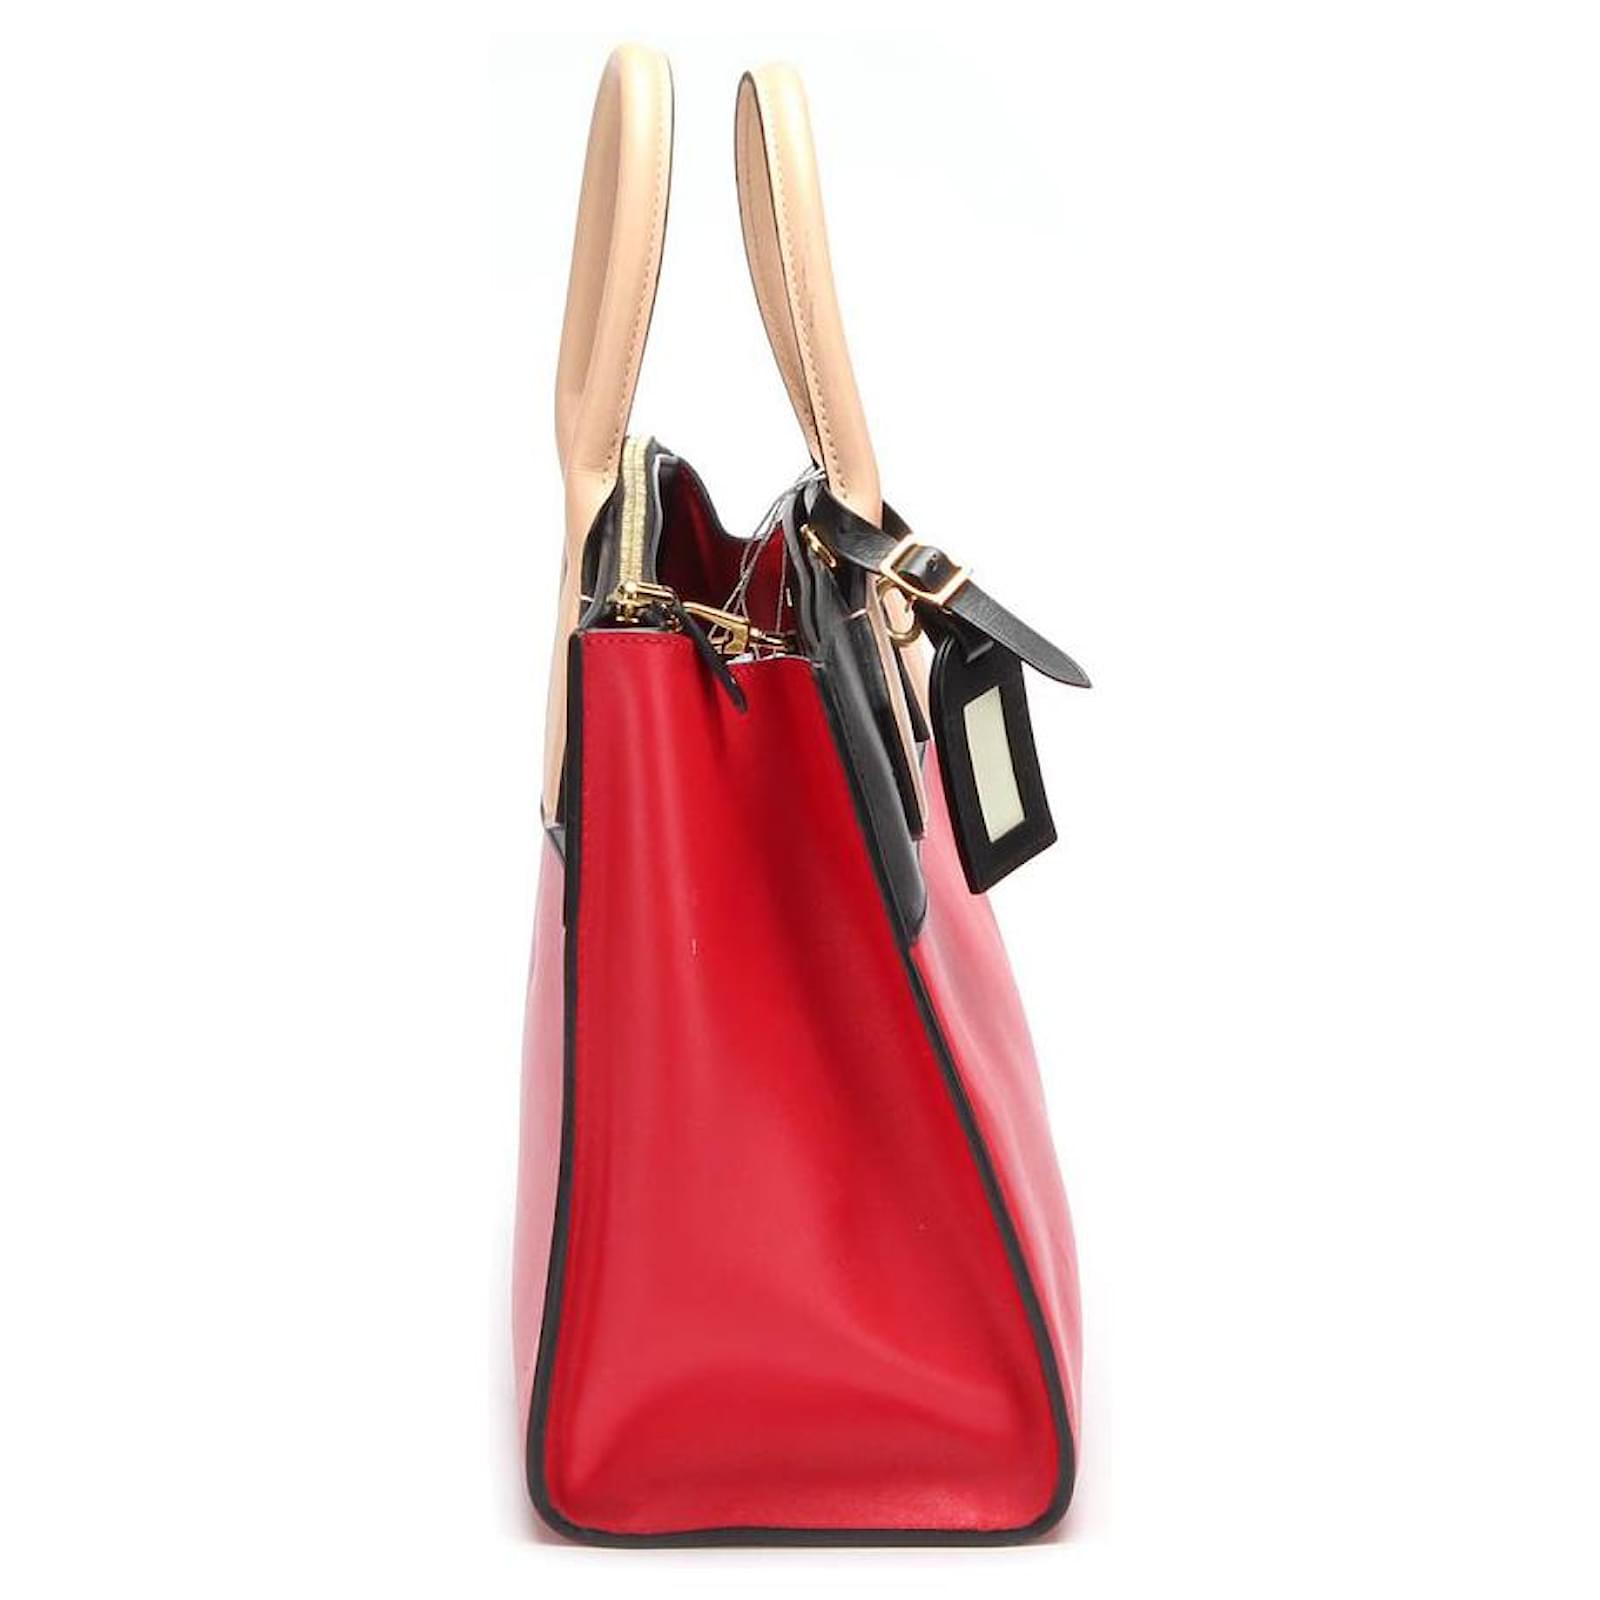 Louis Vuitton Tricolor Leather City Steamer Bag Red Pony-style